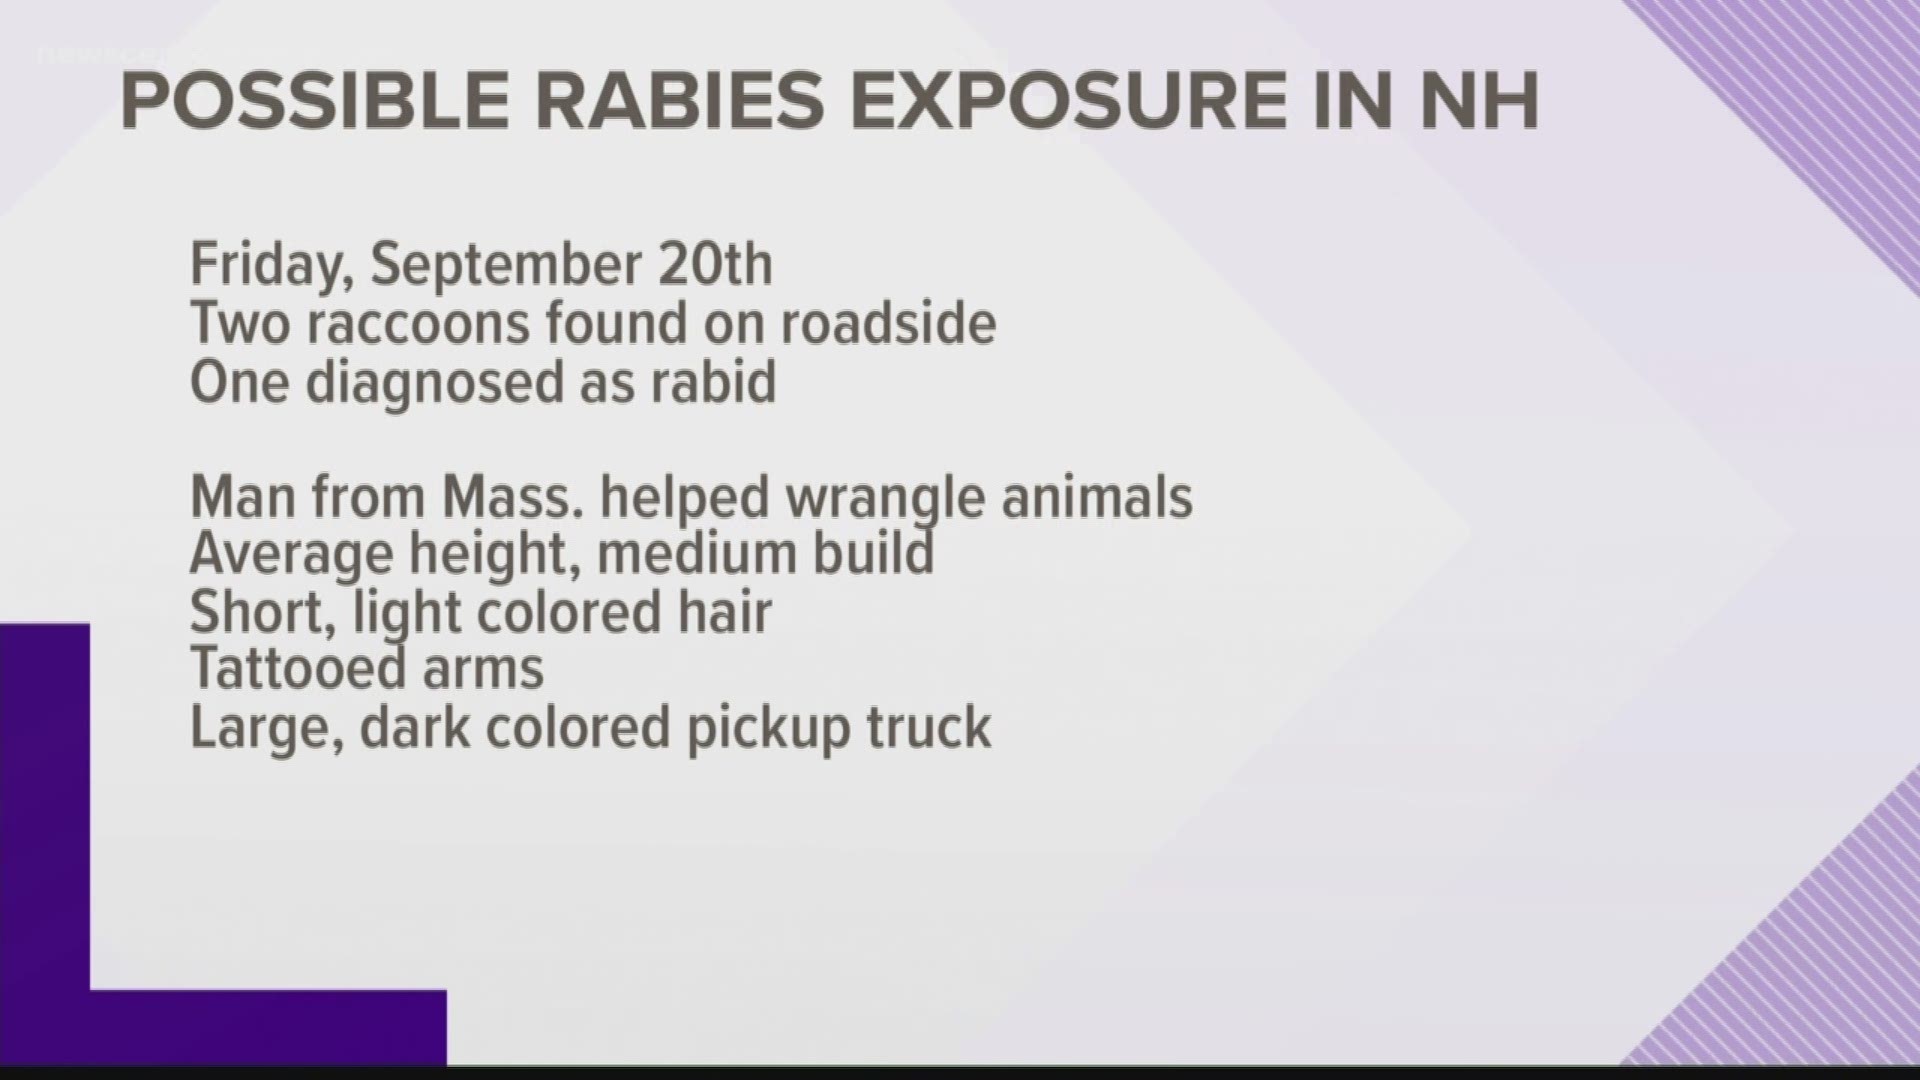 Mass. man sought by N.H. health officials regarding possible rabies exposure